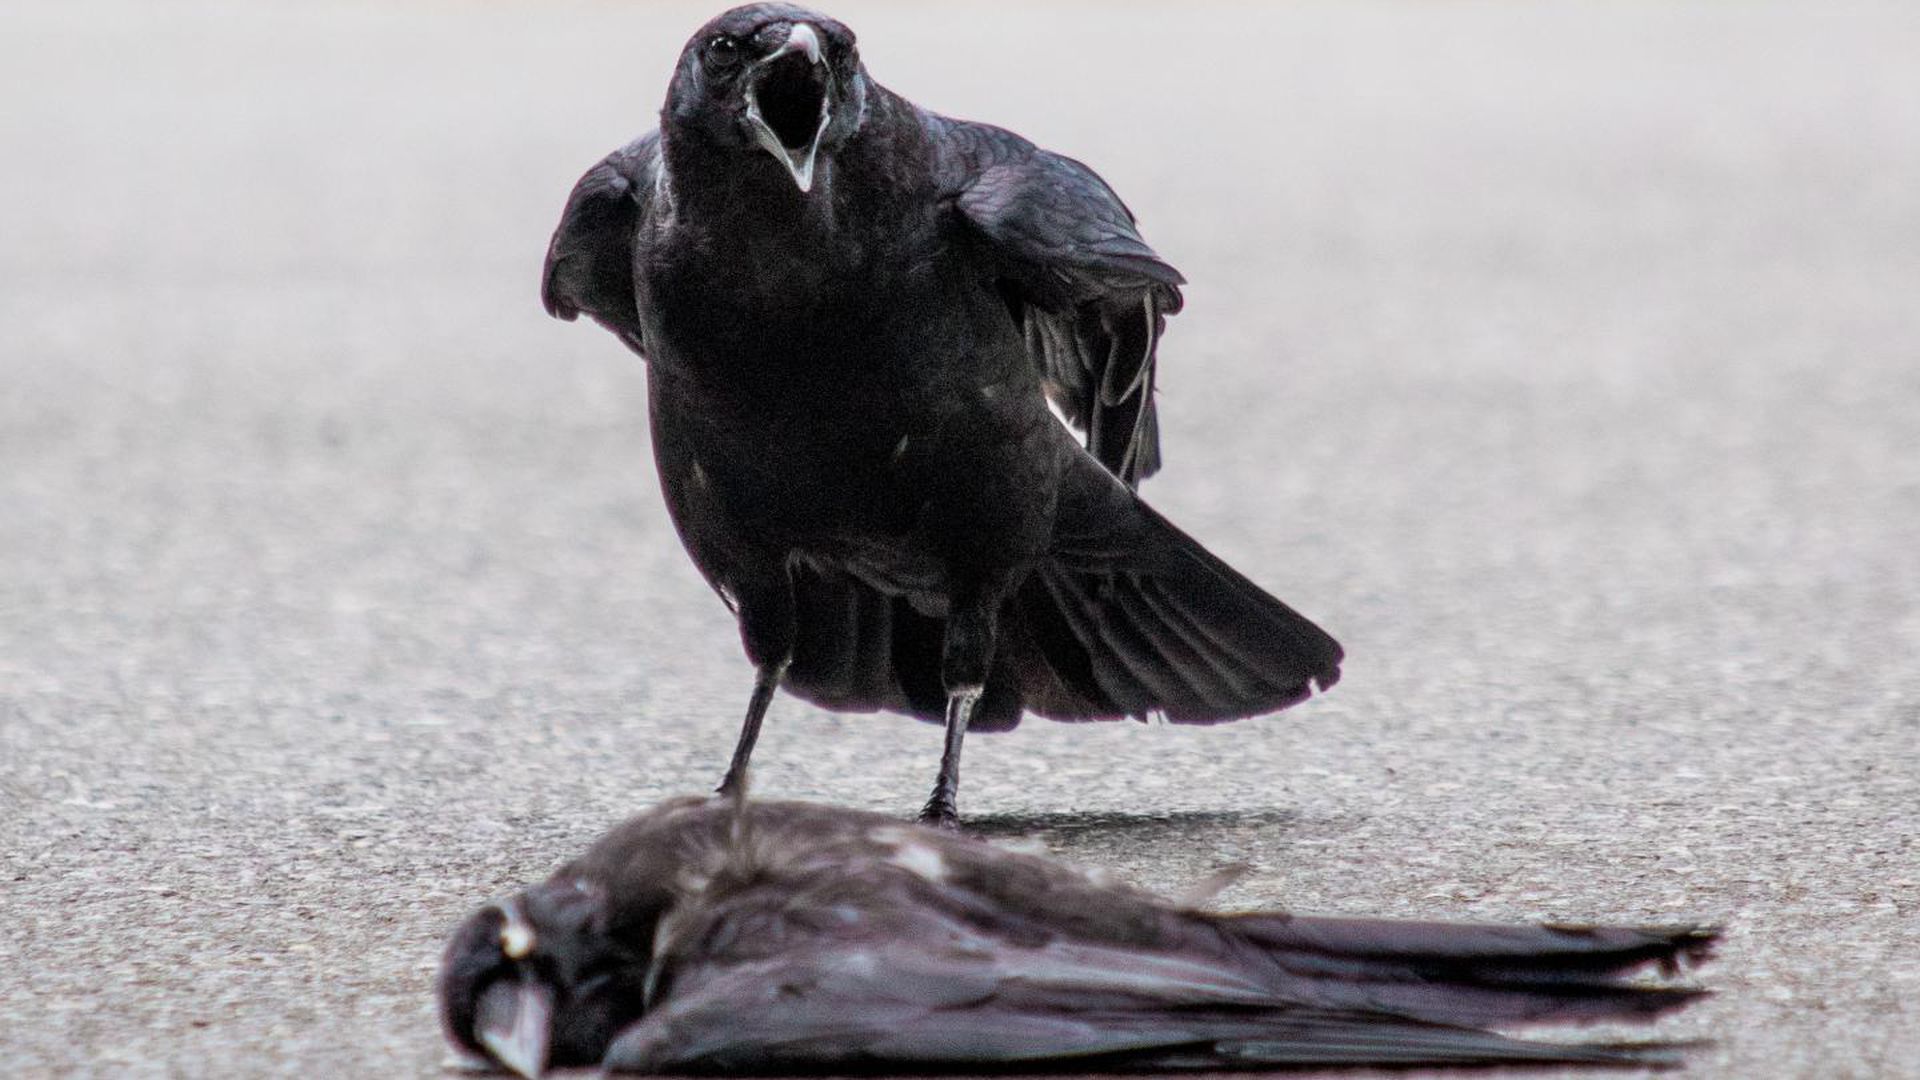 An American crow next to the body of a dead crow.